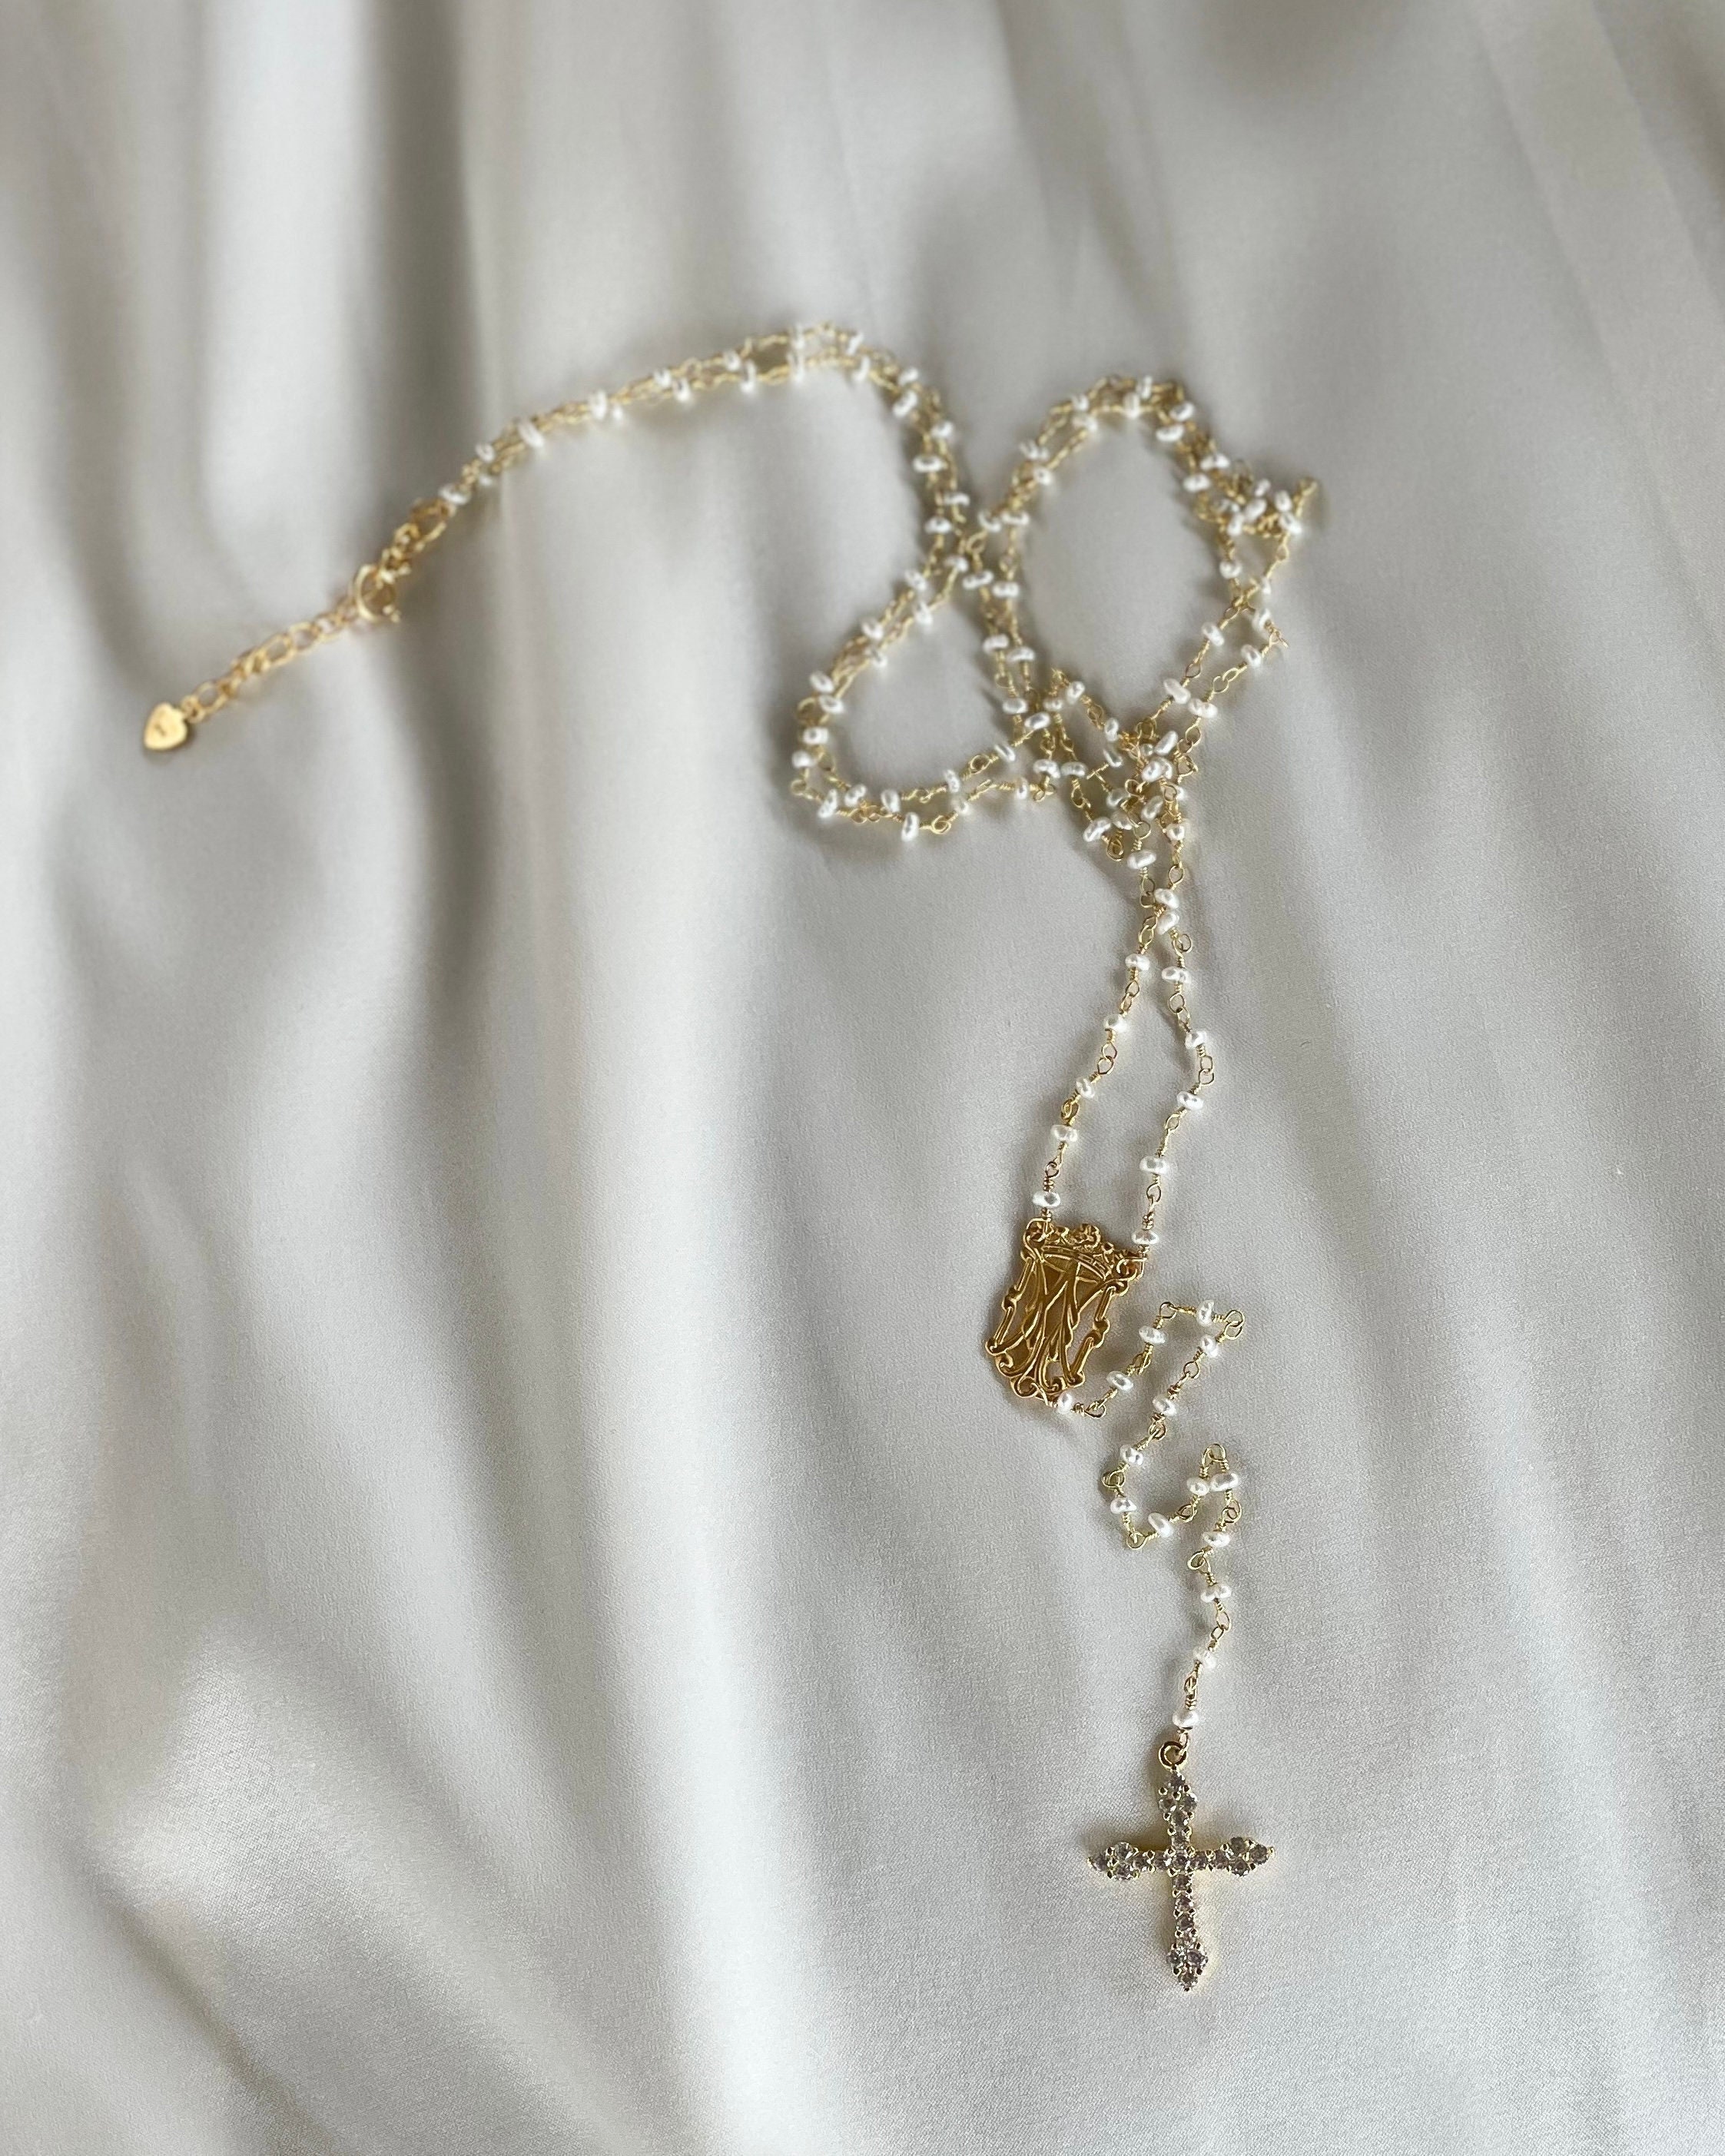 Madonnas Rosary Necklace French Madonna Jewelry Pearl photo